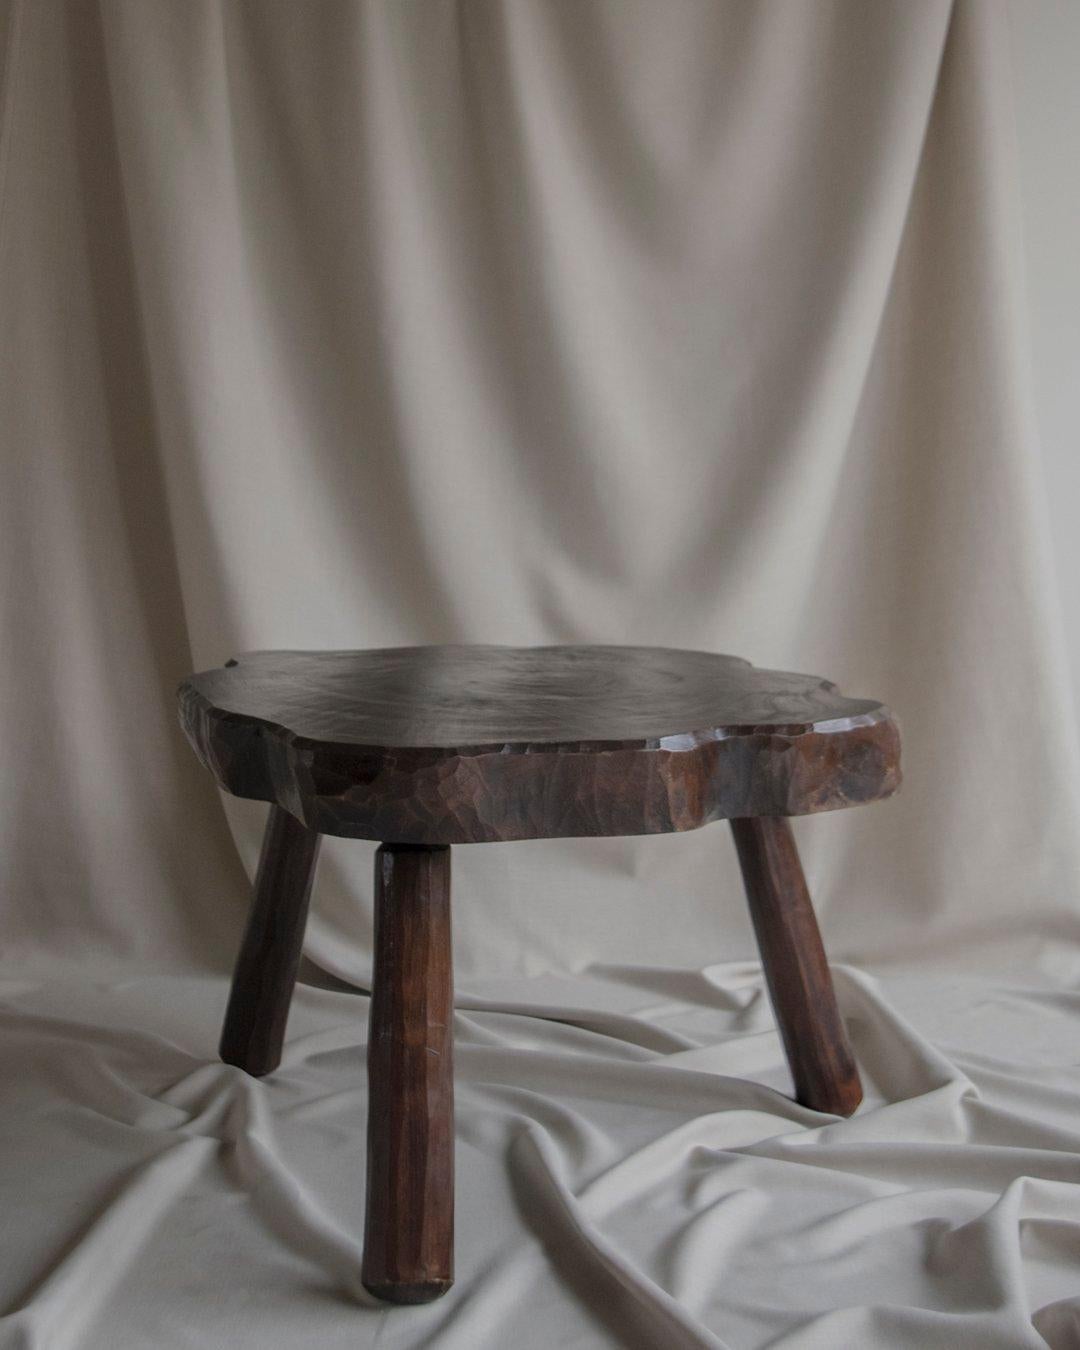 Solid wood - Brutalist center or side table - Circa 1950 France. Fully handmade with amazing carved details. The top is made out of one solid tree trunk. 
Lovely patina and color.

Overall dimensions:
Depth: +/- 77 cm
Width: +/- 75 cm
Height: